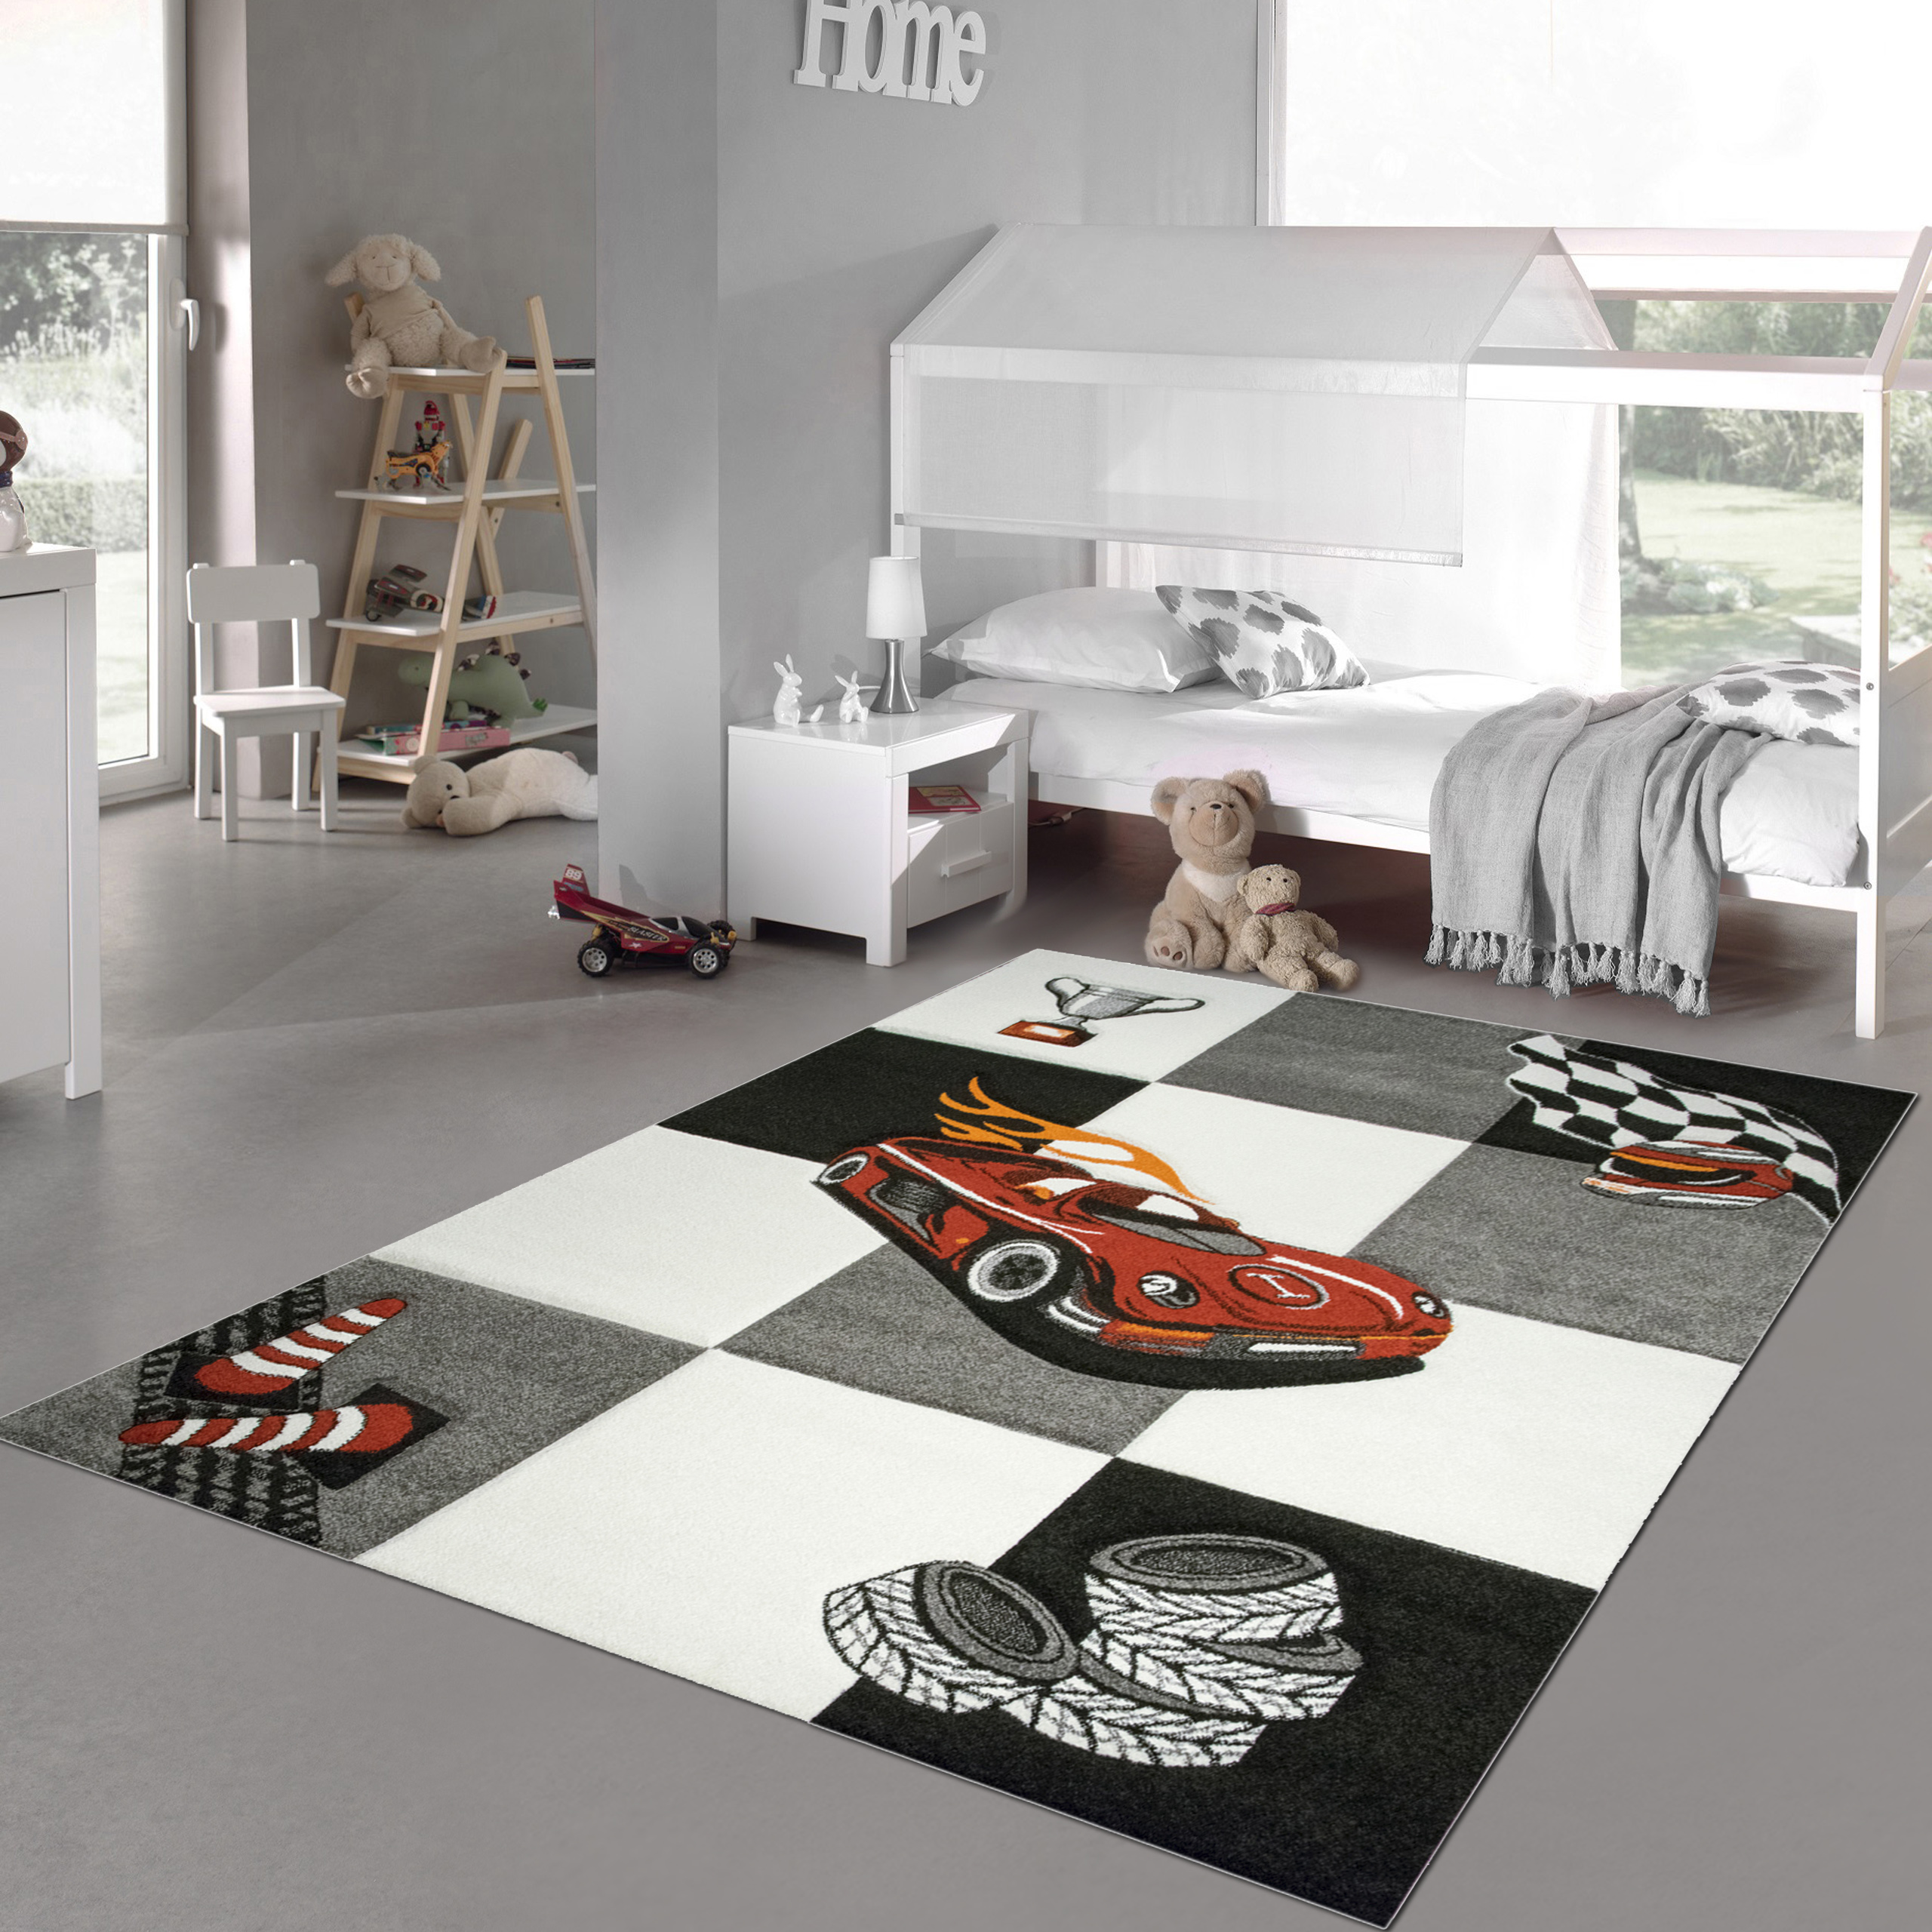 Merinos Childrens rug road rug learning carpet for boys with streets and houses in gray size 80x150 cm 